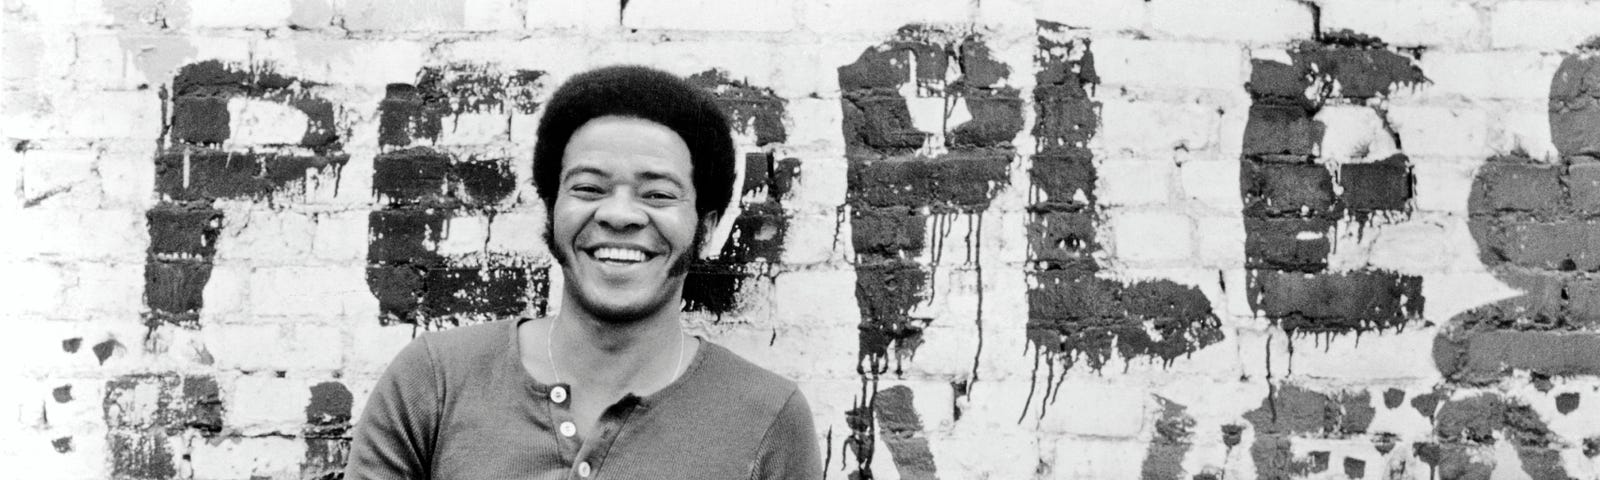 Bill Withers poses for a portrait against a brick wall circa 1973.